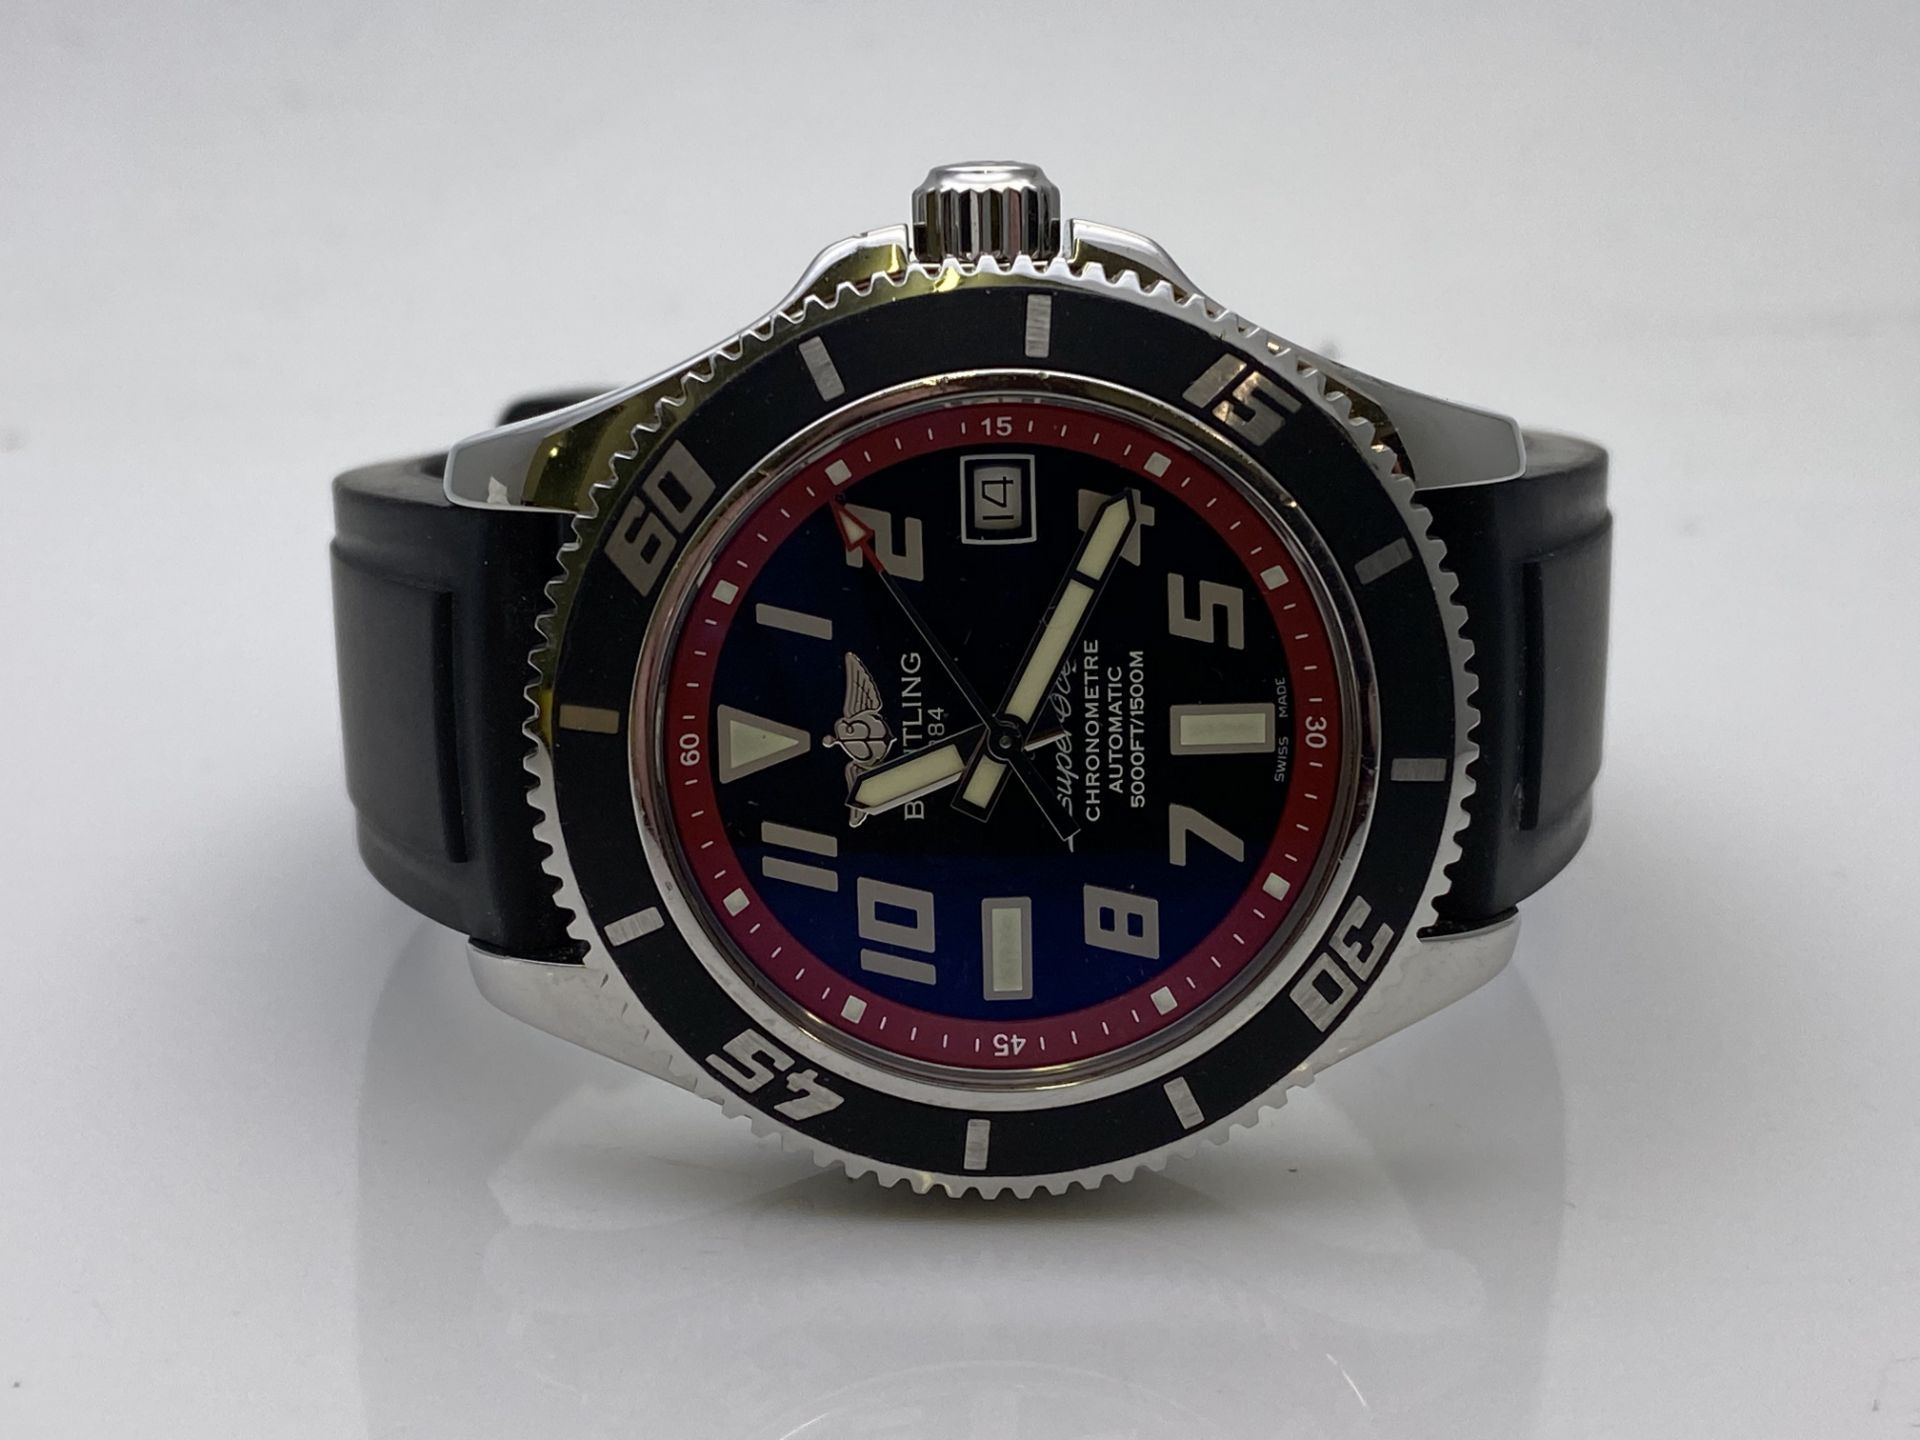 GENTS BREITLING SUPEROCEAN MODEL- A17364, BLACK RUBBER STRAP WITH STAINLESS STEEL CASE AND BLACK